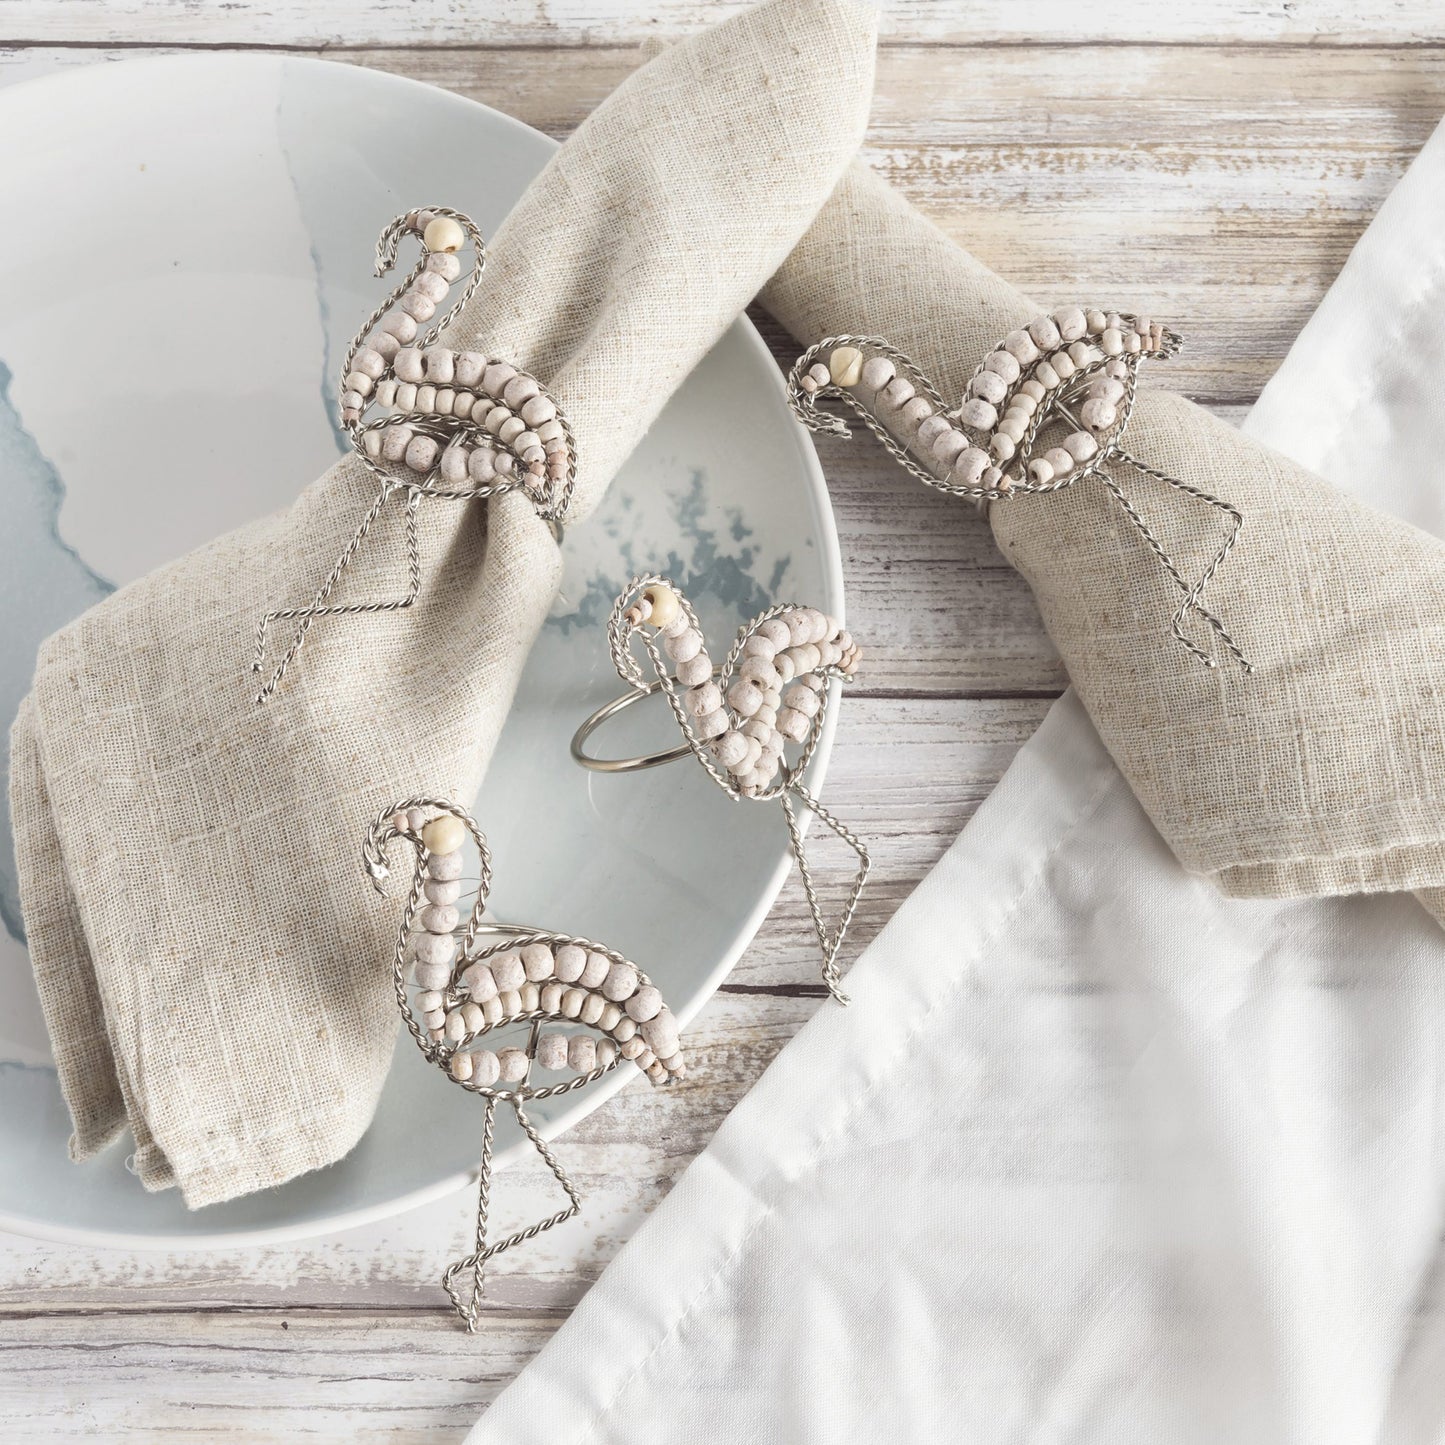 4 flamingo shaped napkin rings constructed of natural wooden beads and wire for the legs.